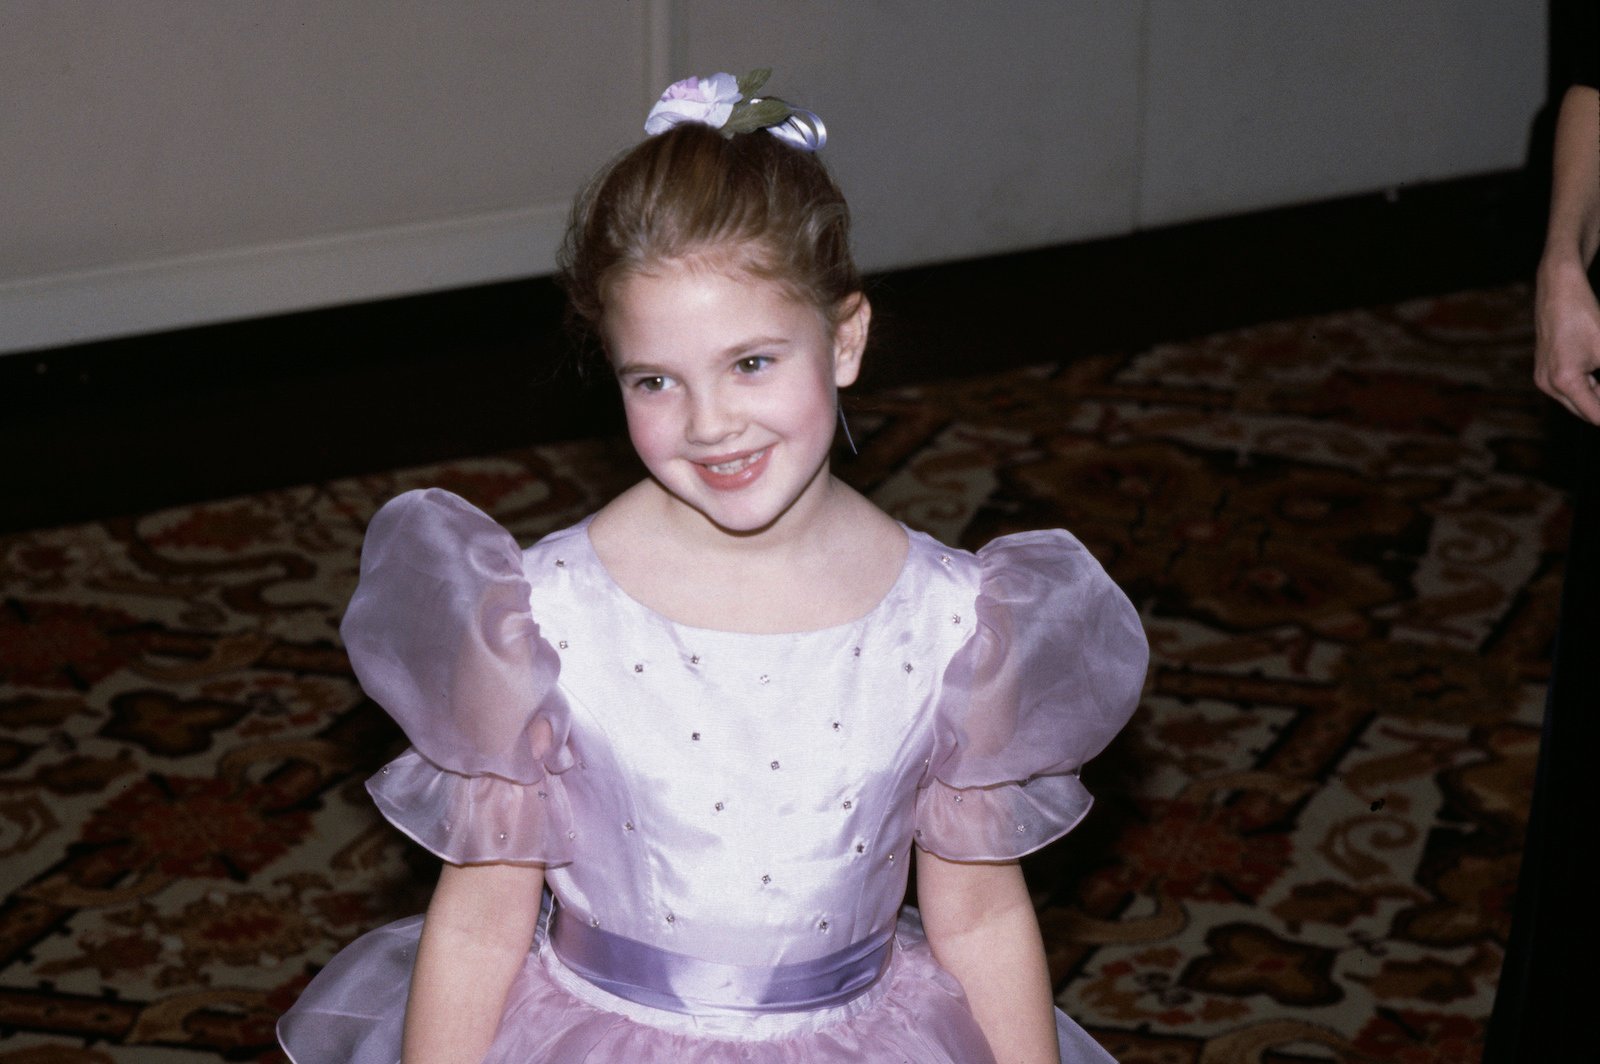 Drew Barrymore attended the 40th Annual Golden Globe Awards in 1983